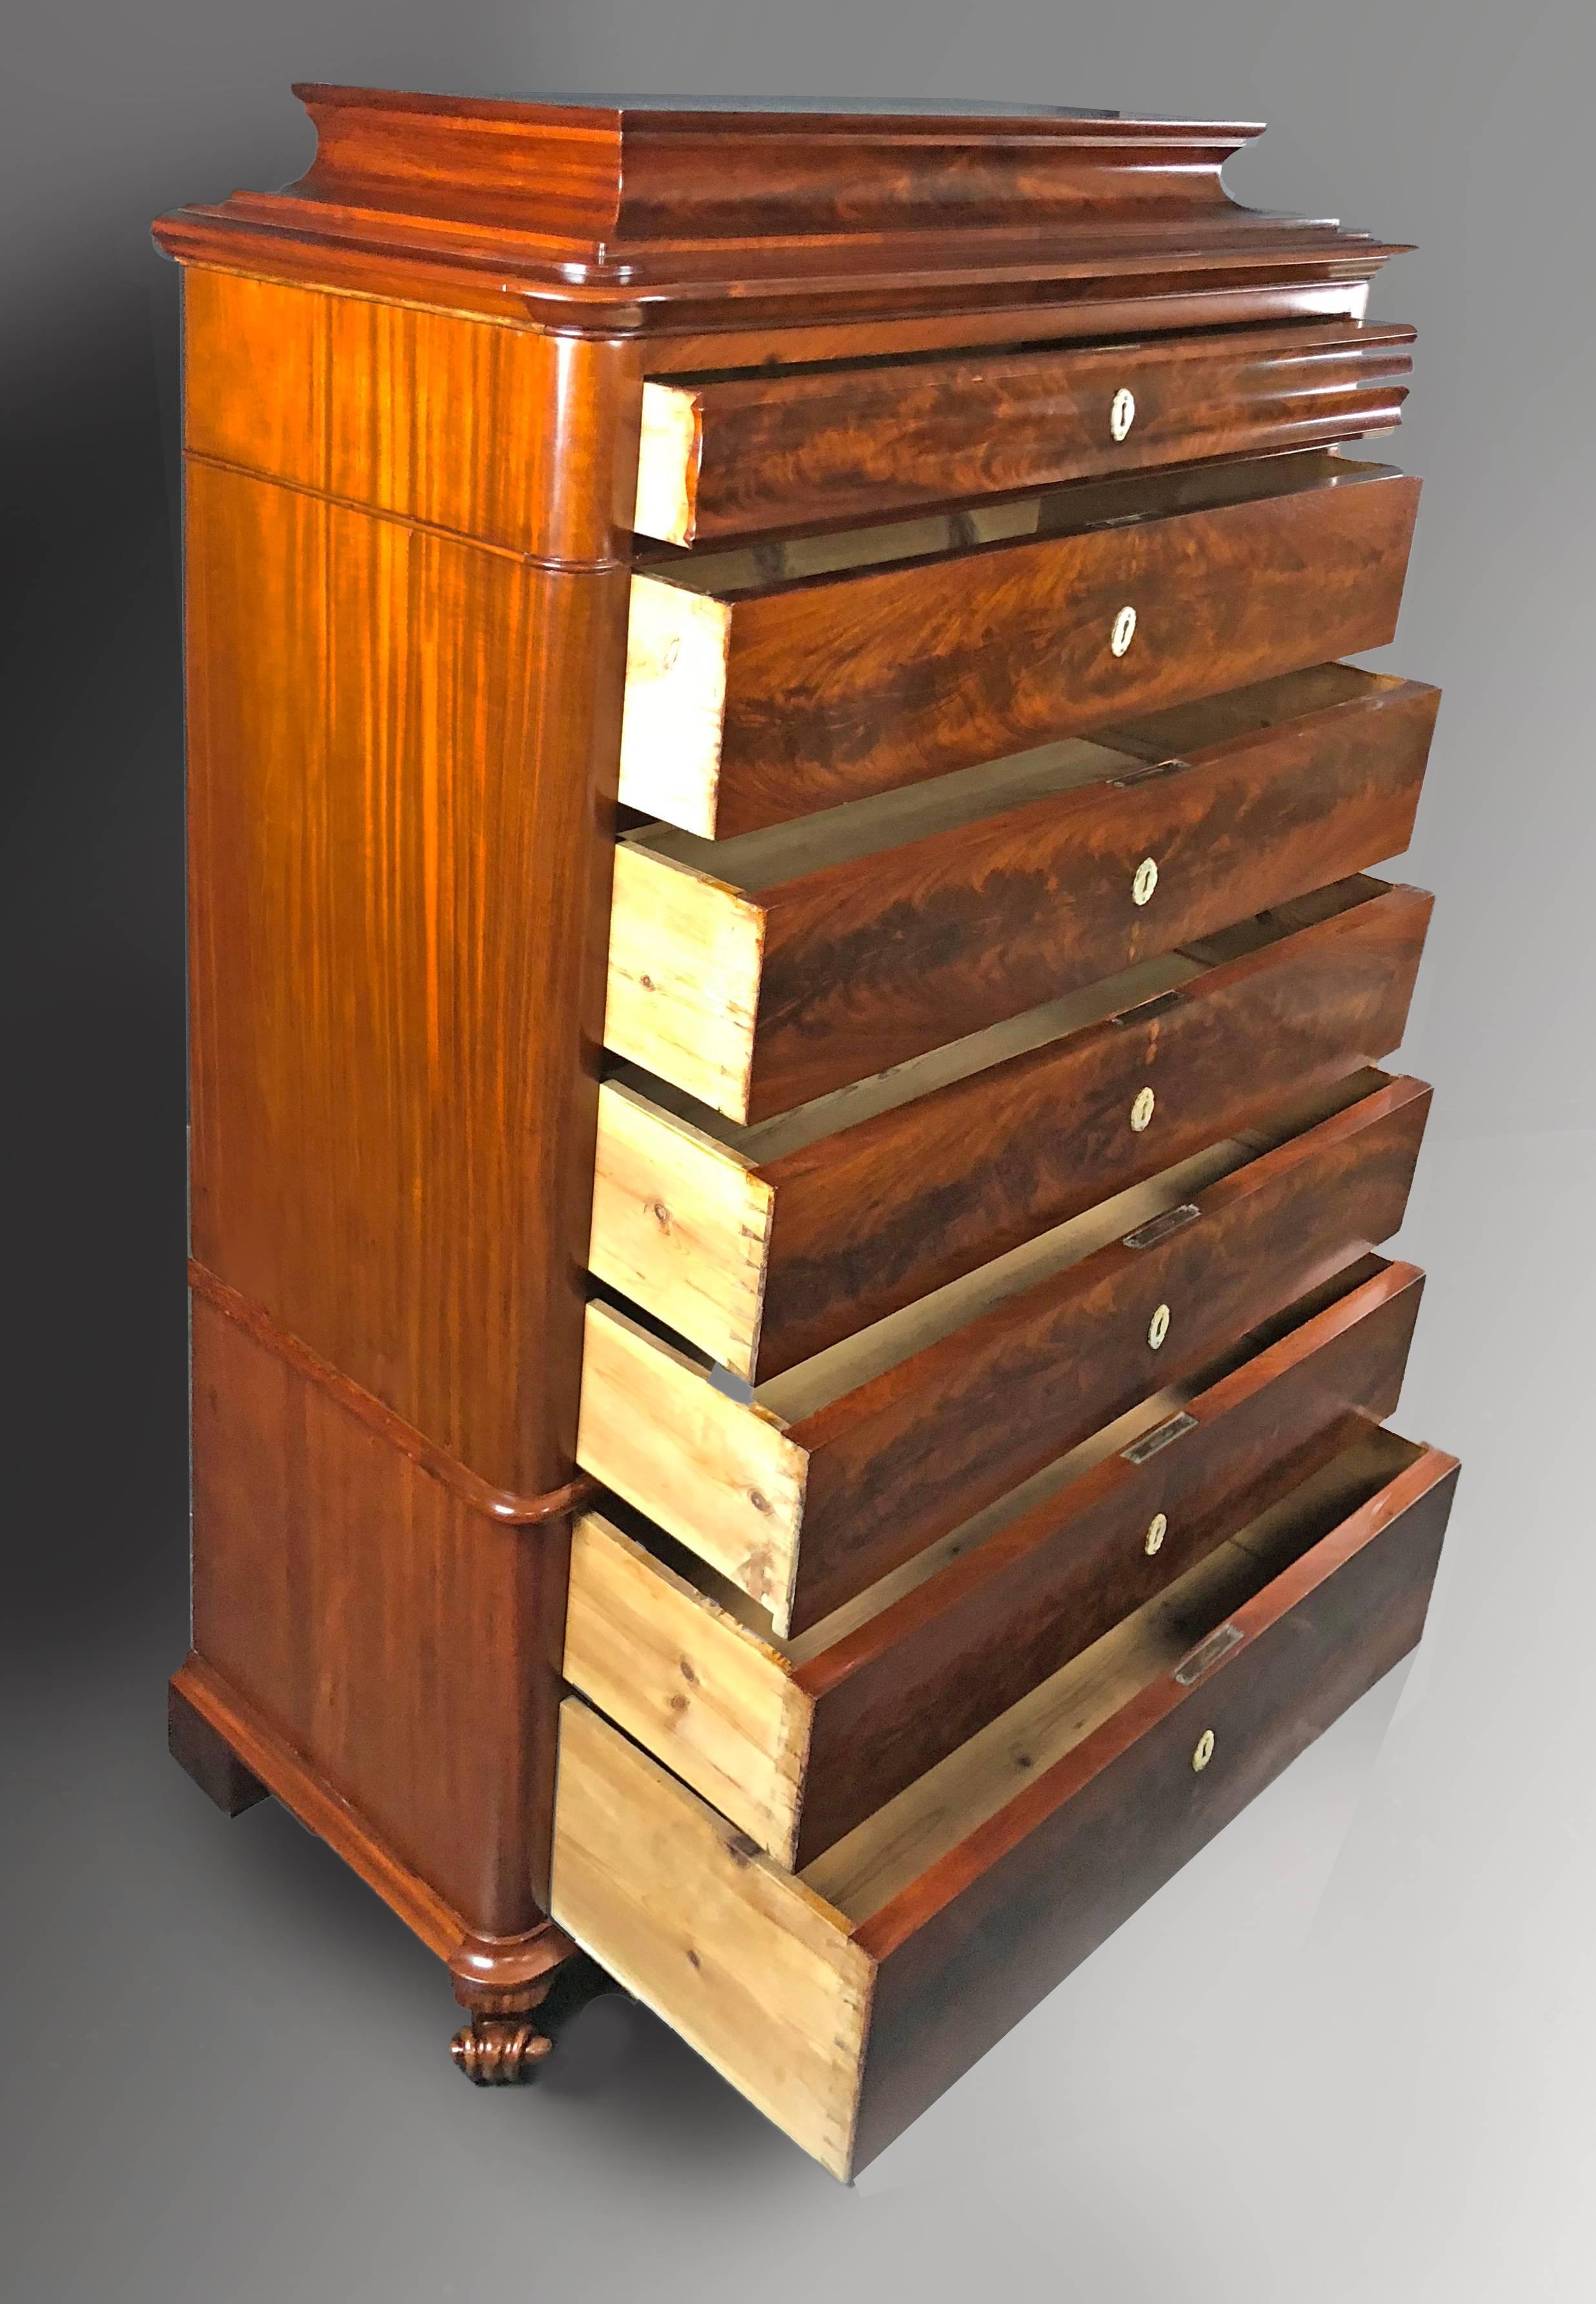 Danish Mid 19th Century Biedermeier Commode Tall Chest of drawers For Sale 1